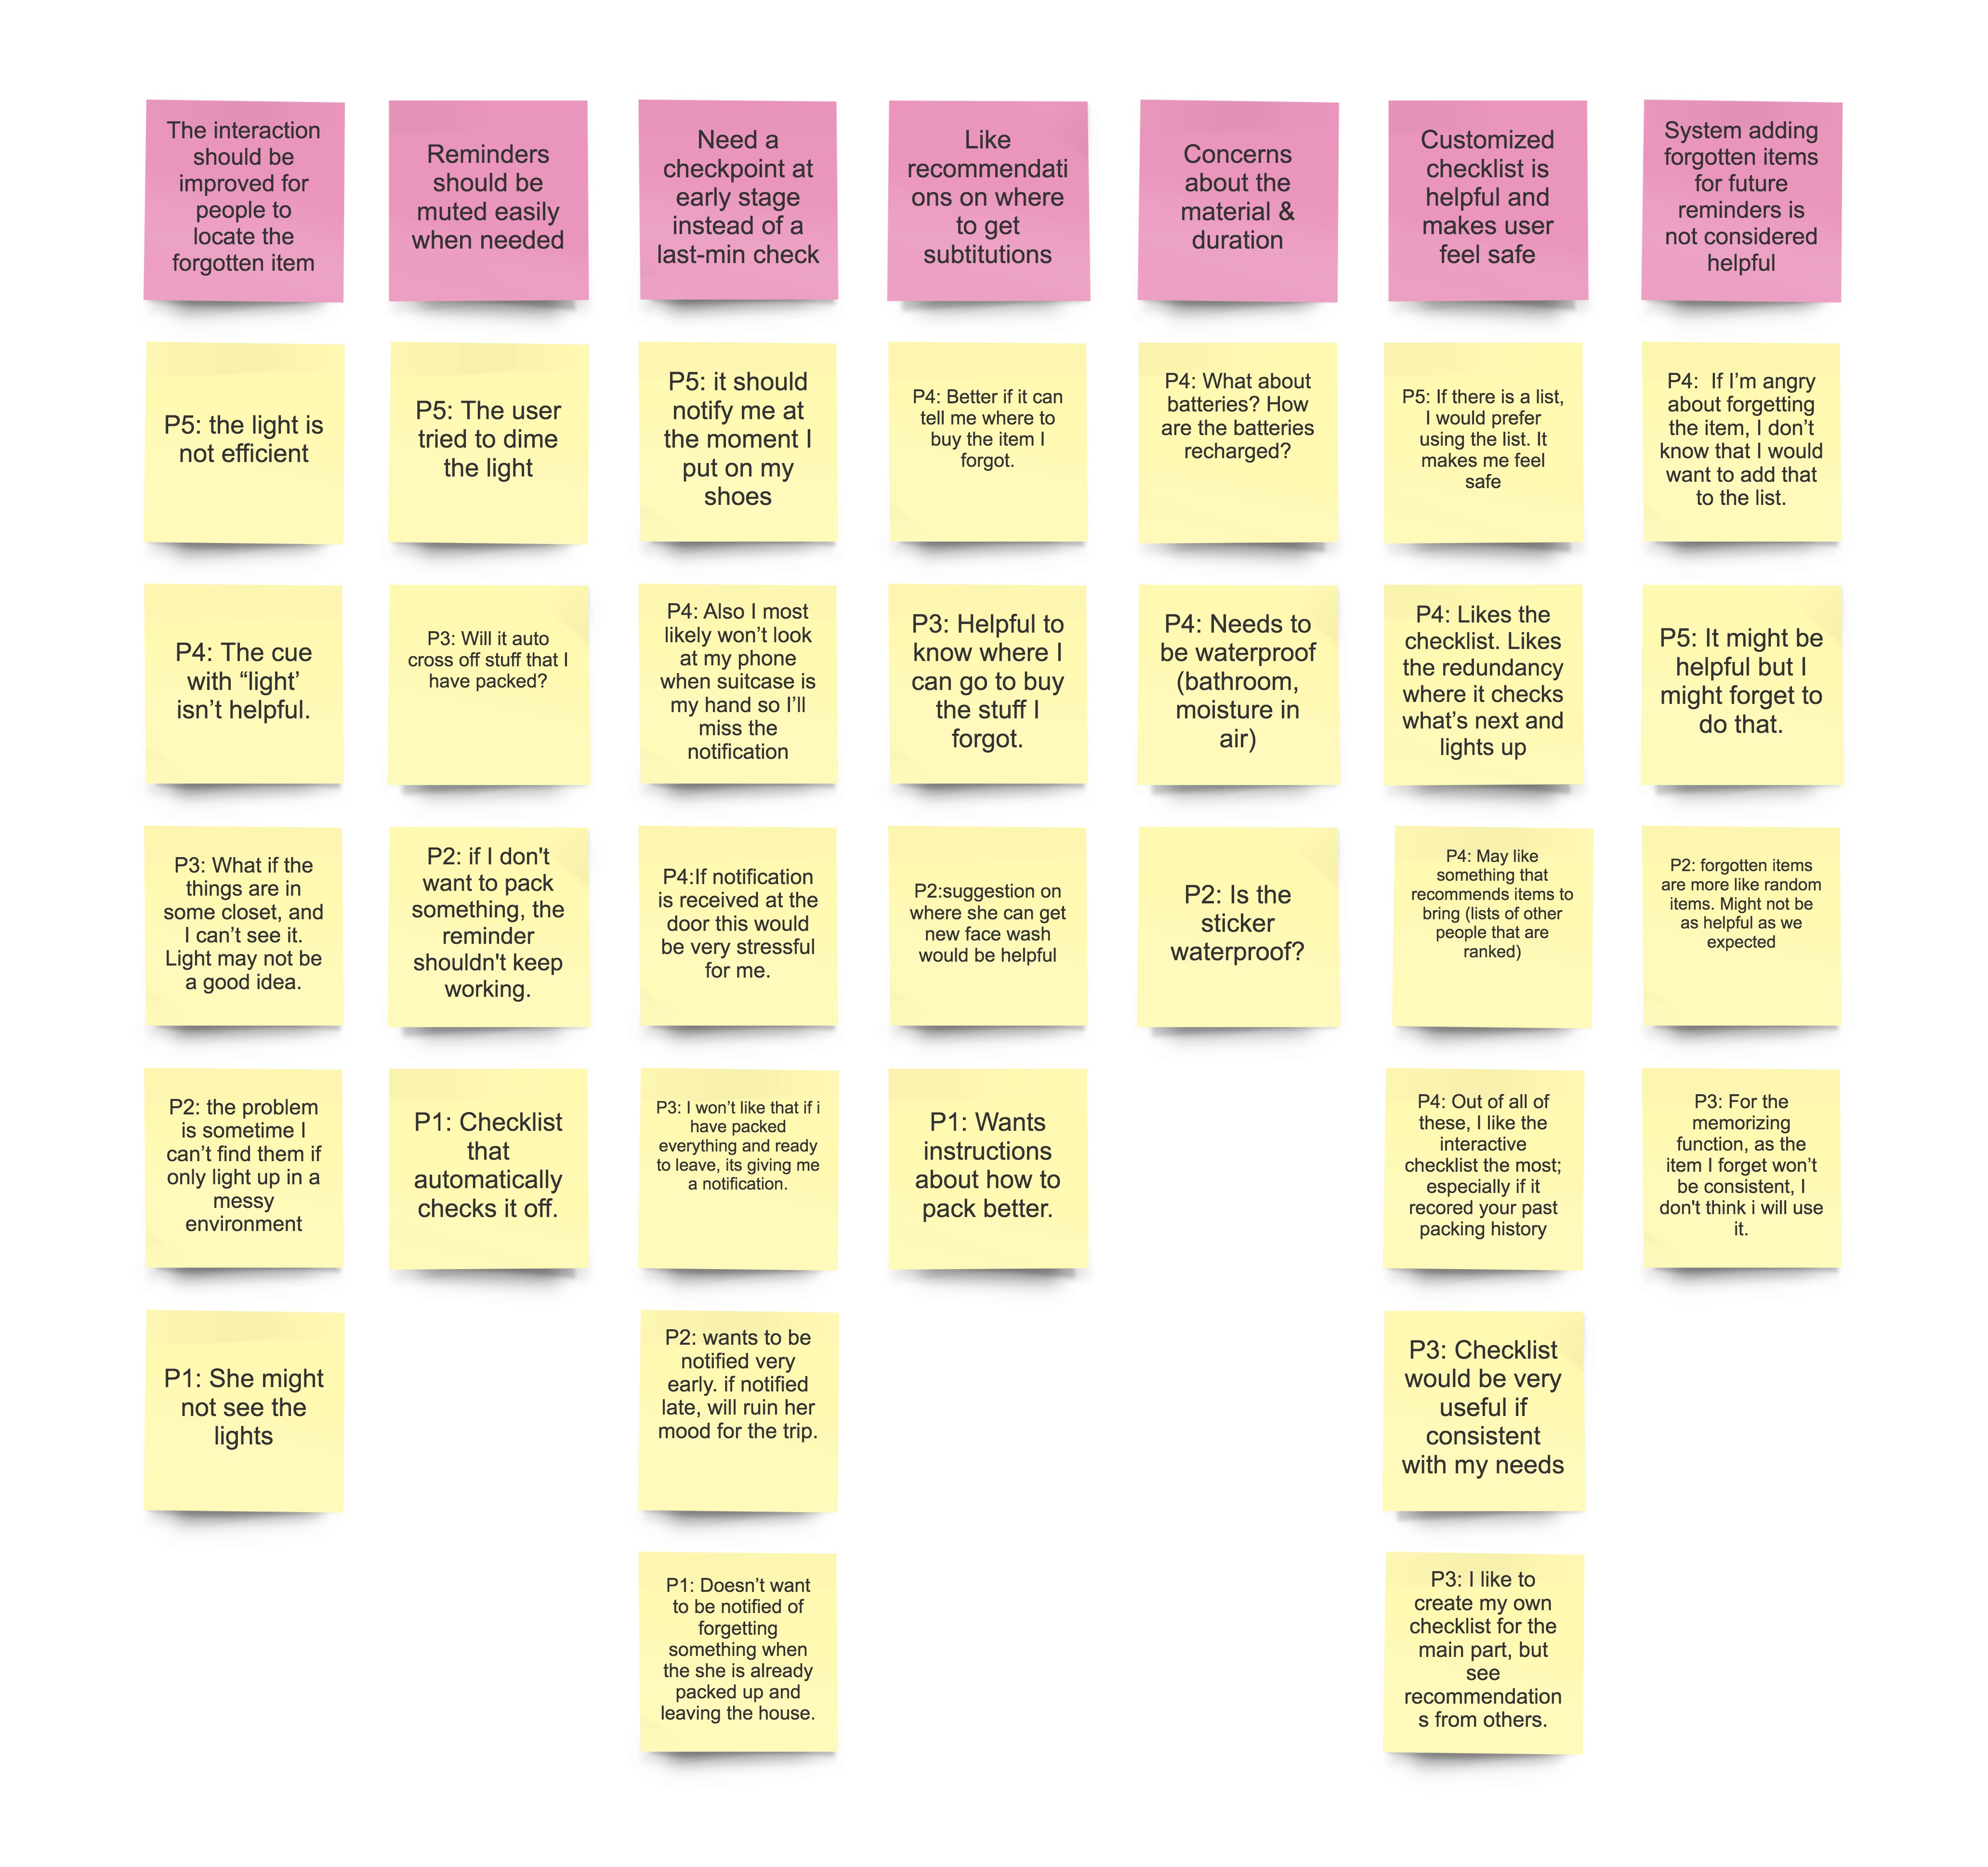 Affinity wall created from interview & diary study insights